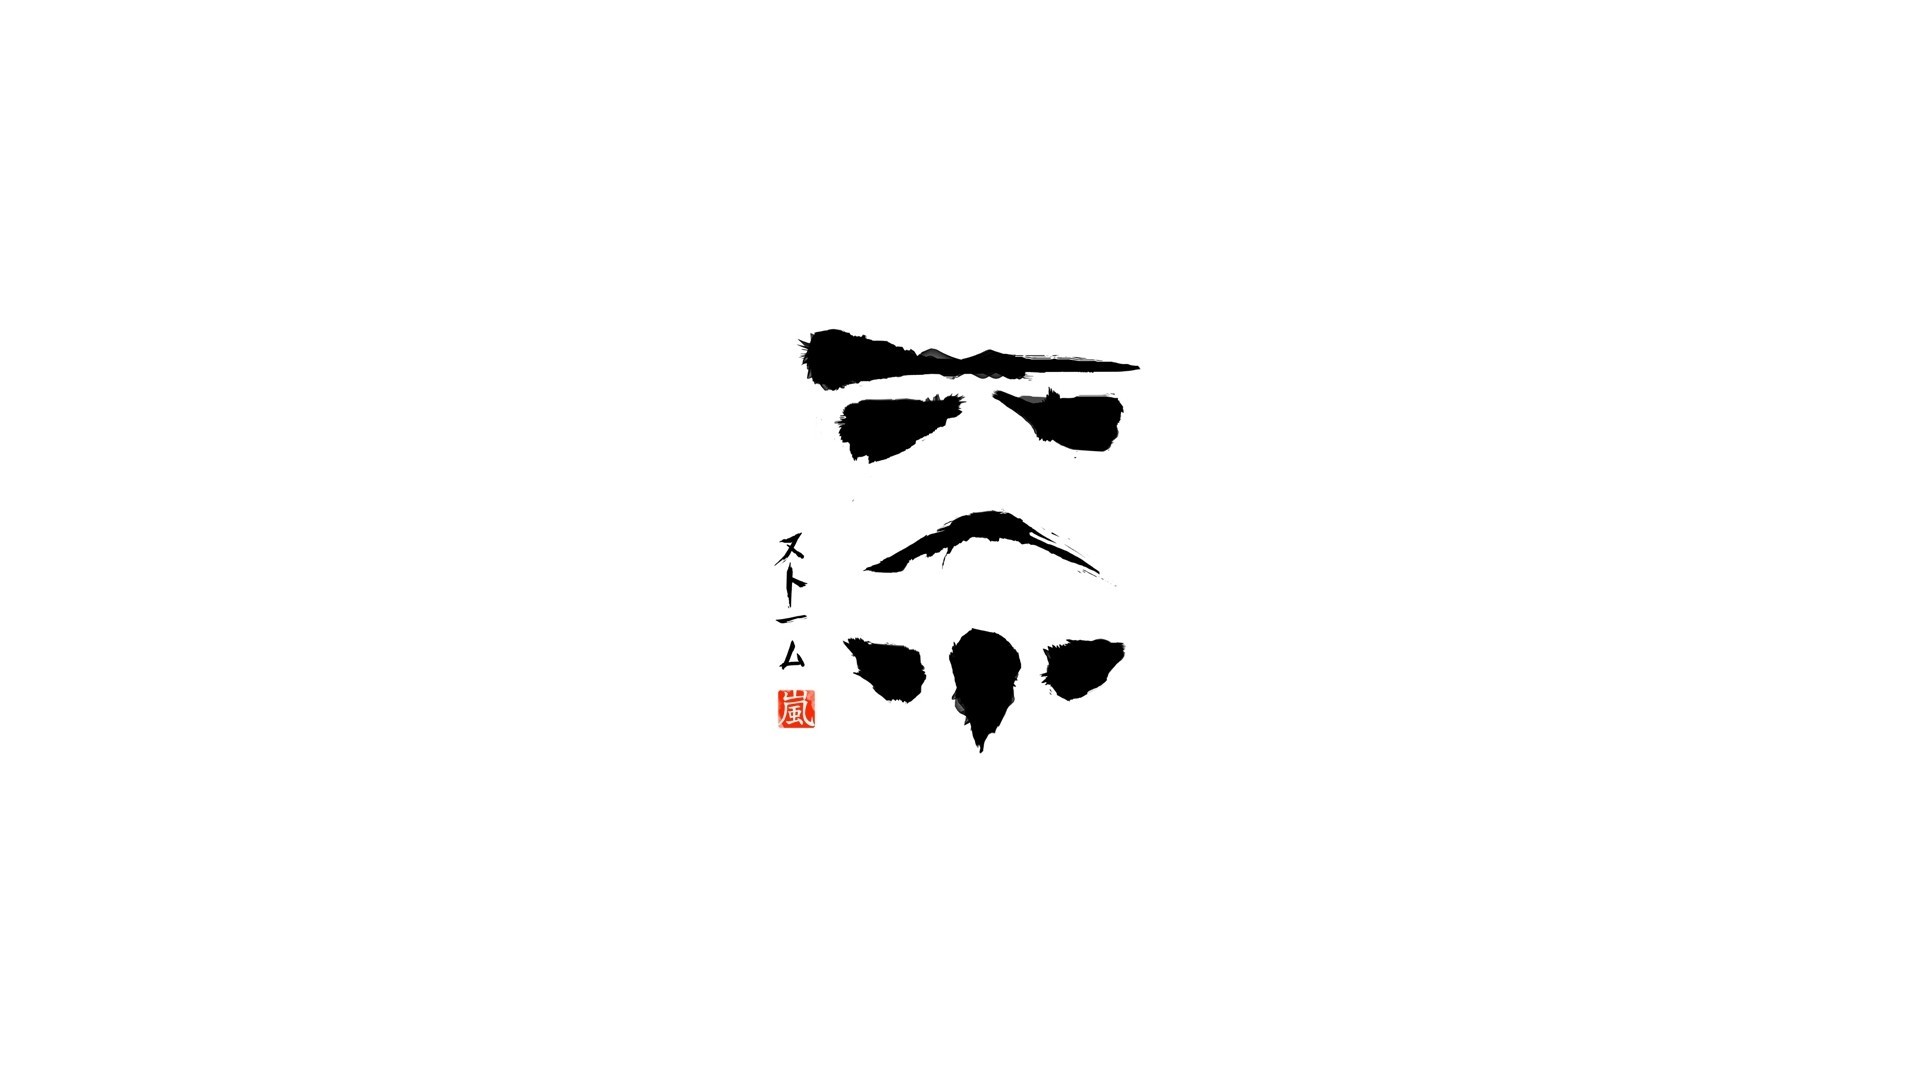 General 1920x1080 Star Wars minimalism stormtrooper science fiction artwork Imperial Stormtrooper simple background white background